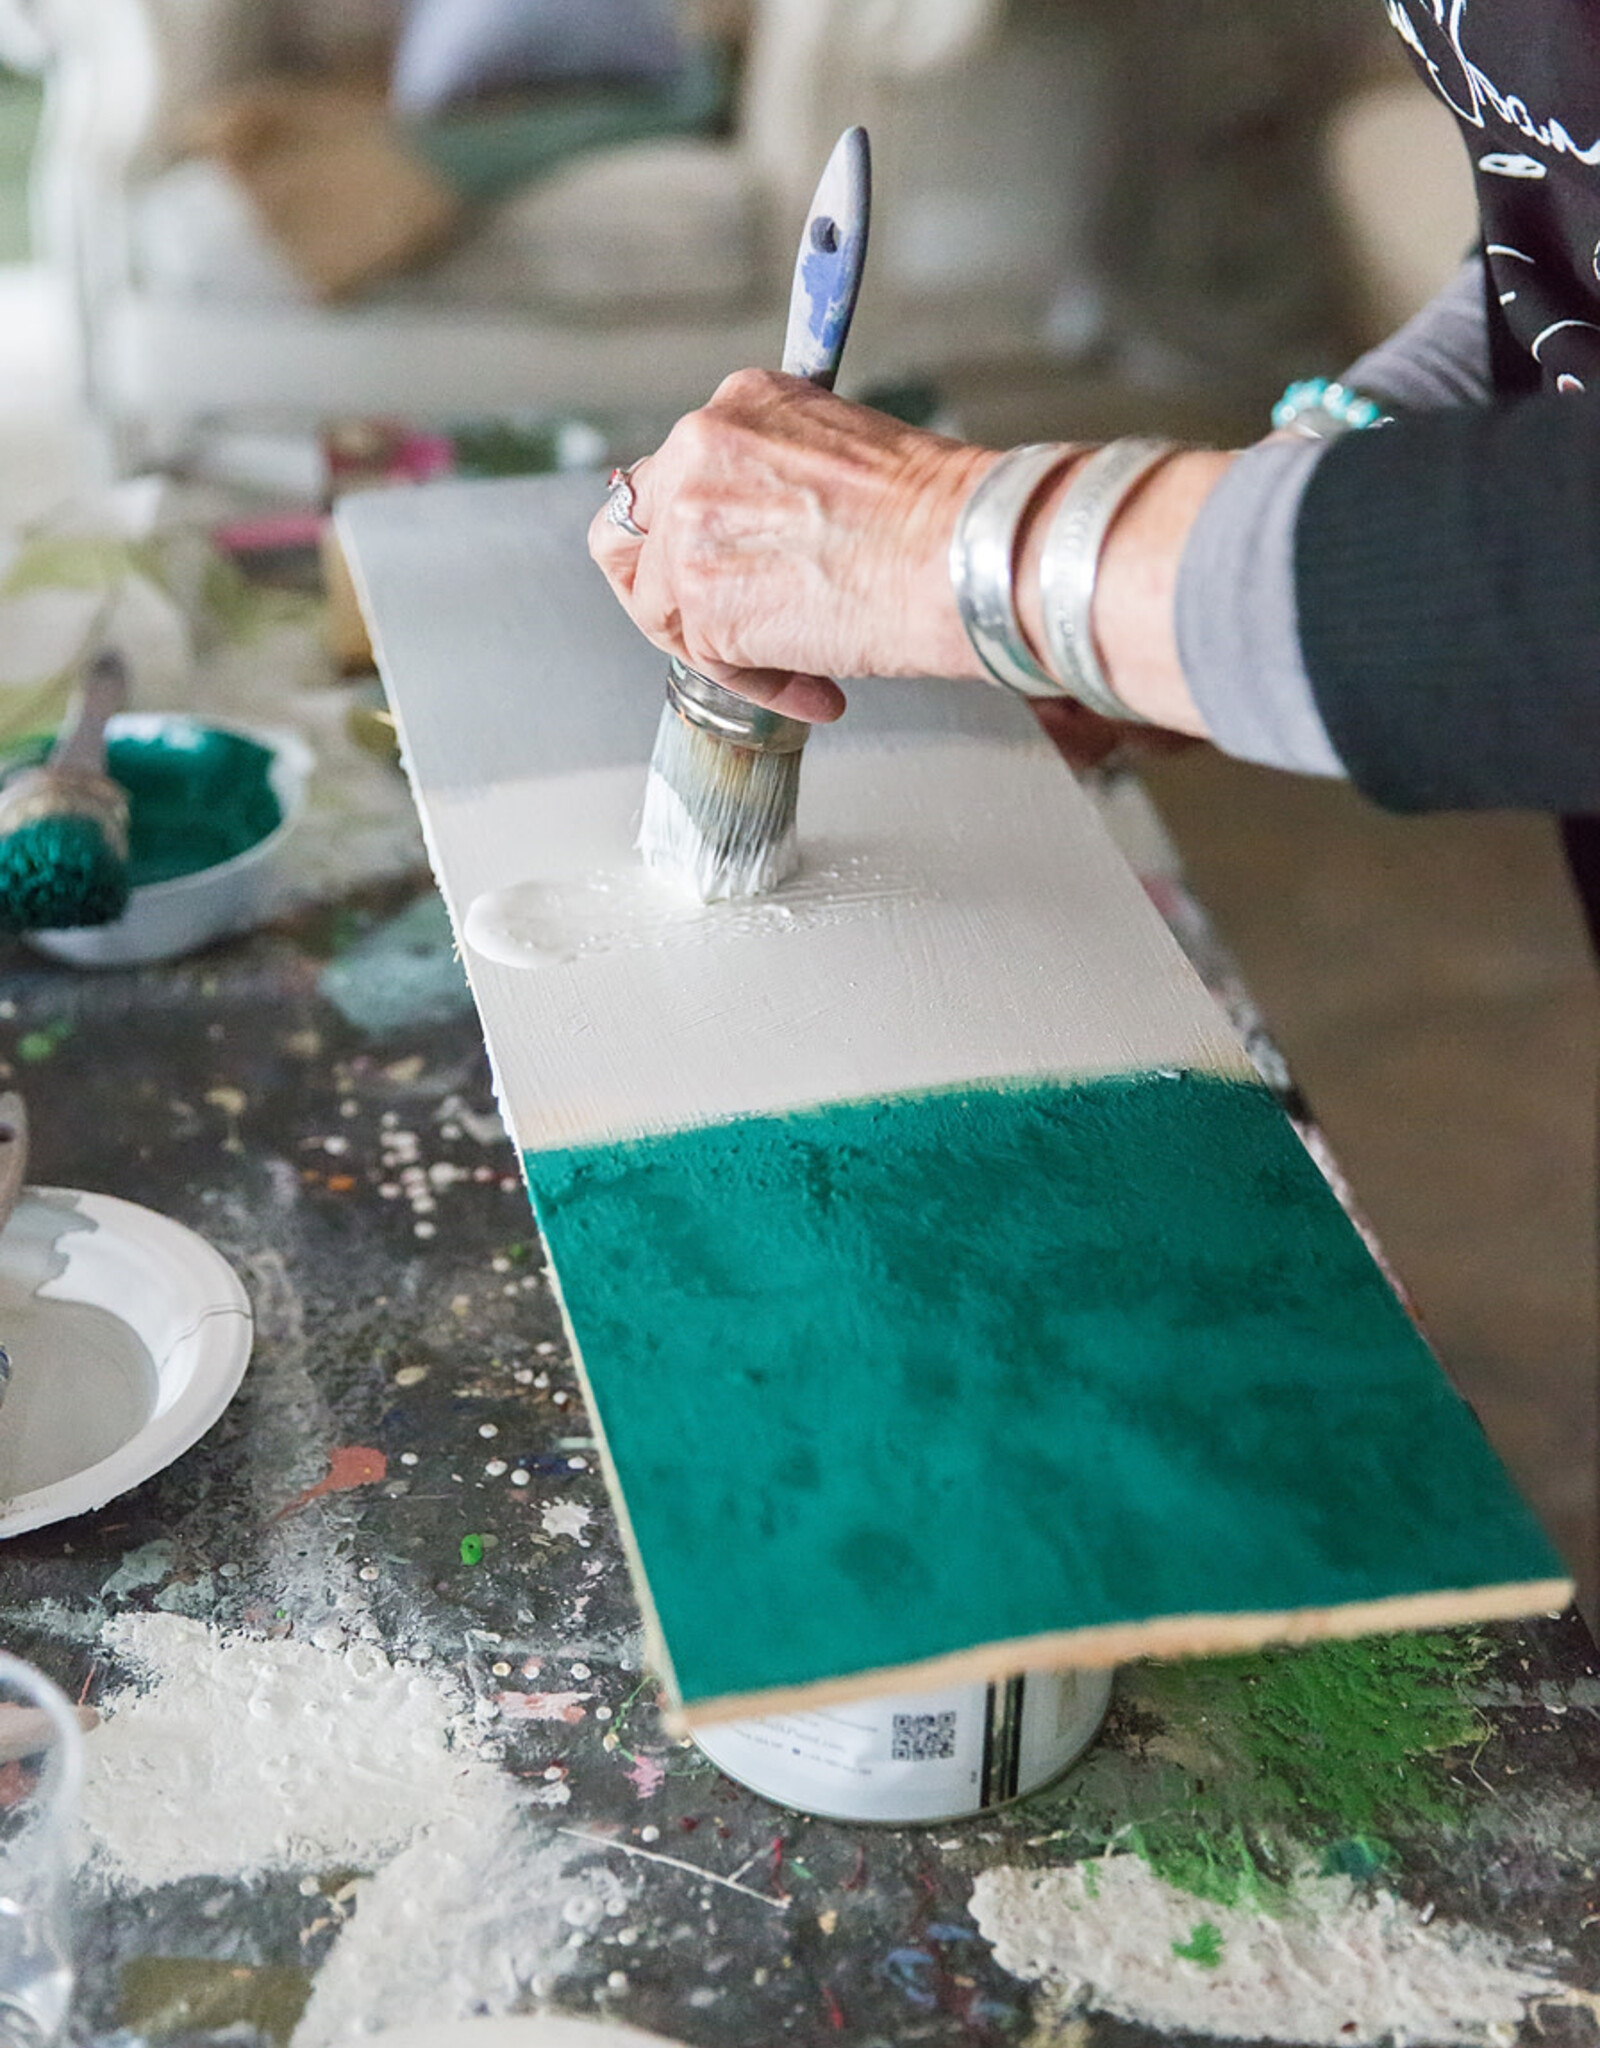 Hansell & Halkett Introduction to Annie Sloan Paint Class - May 26th 10am-12pm